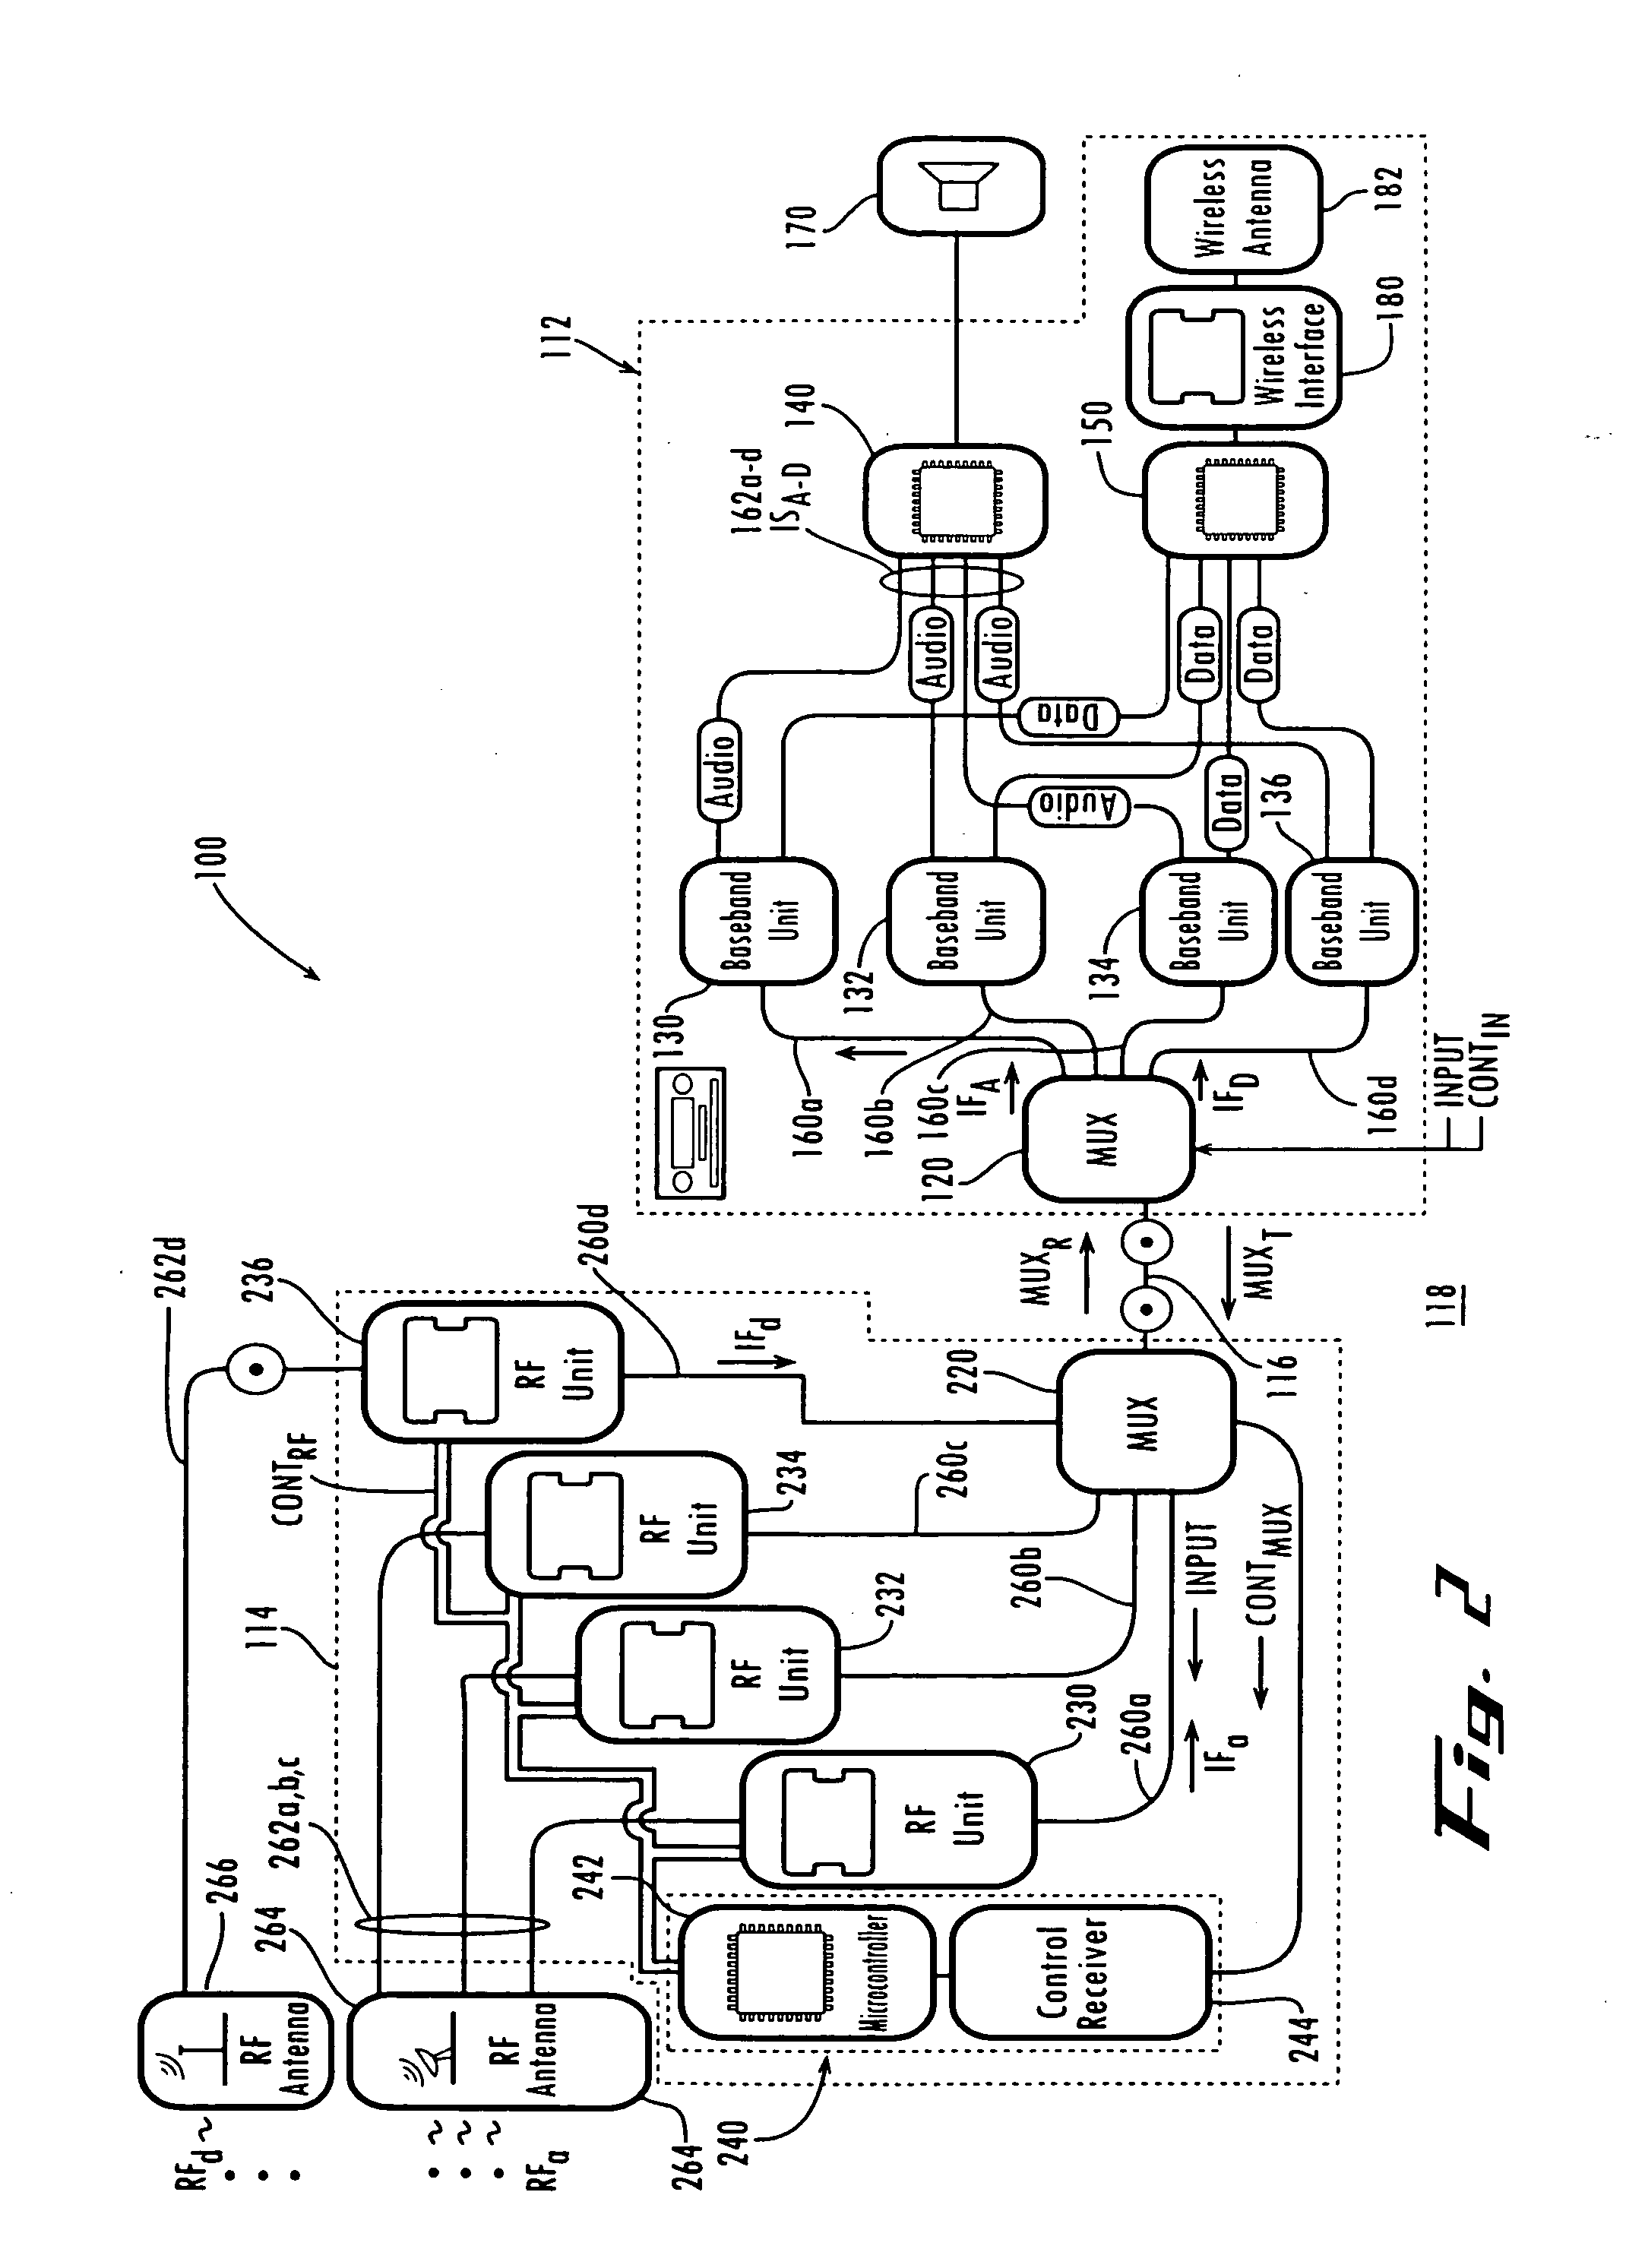 Apparatus having and method for implementing a distributed architecture for receiving and/or transmitting radio frequency signals